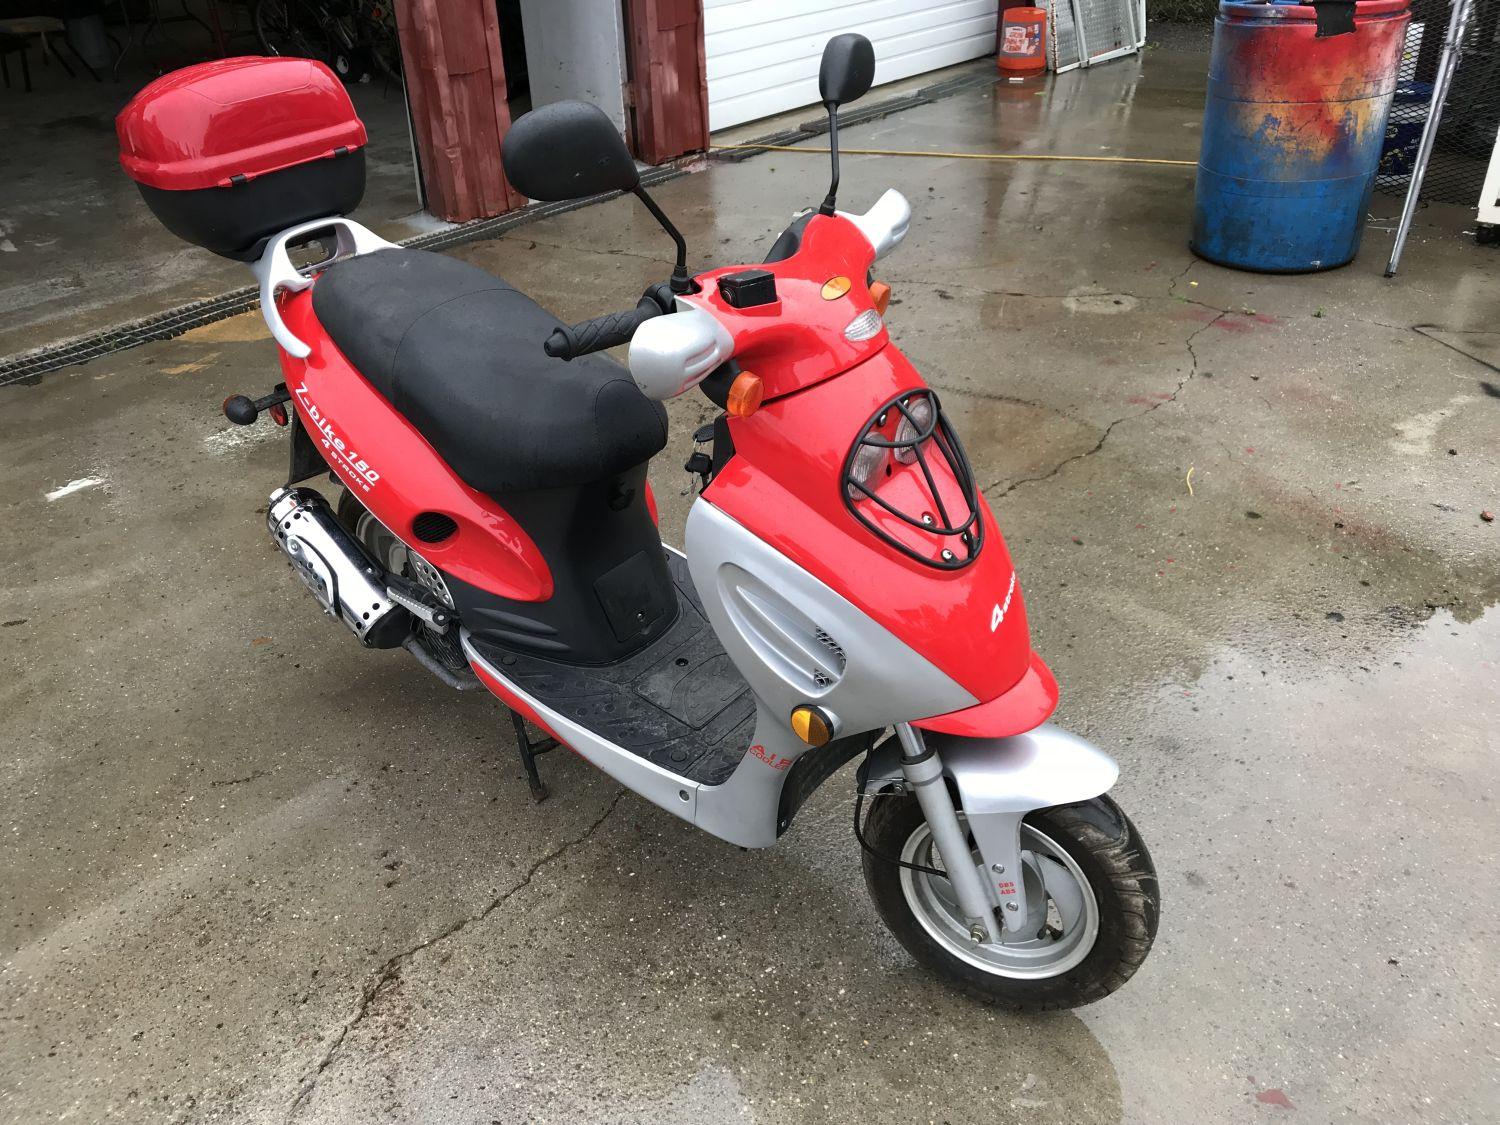 2005 Zongshen Z-bike 150 red scooter, 1 OWNER, 300mi, 150cc single cylinder air cooled four stroke g